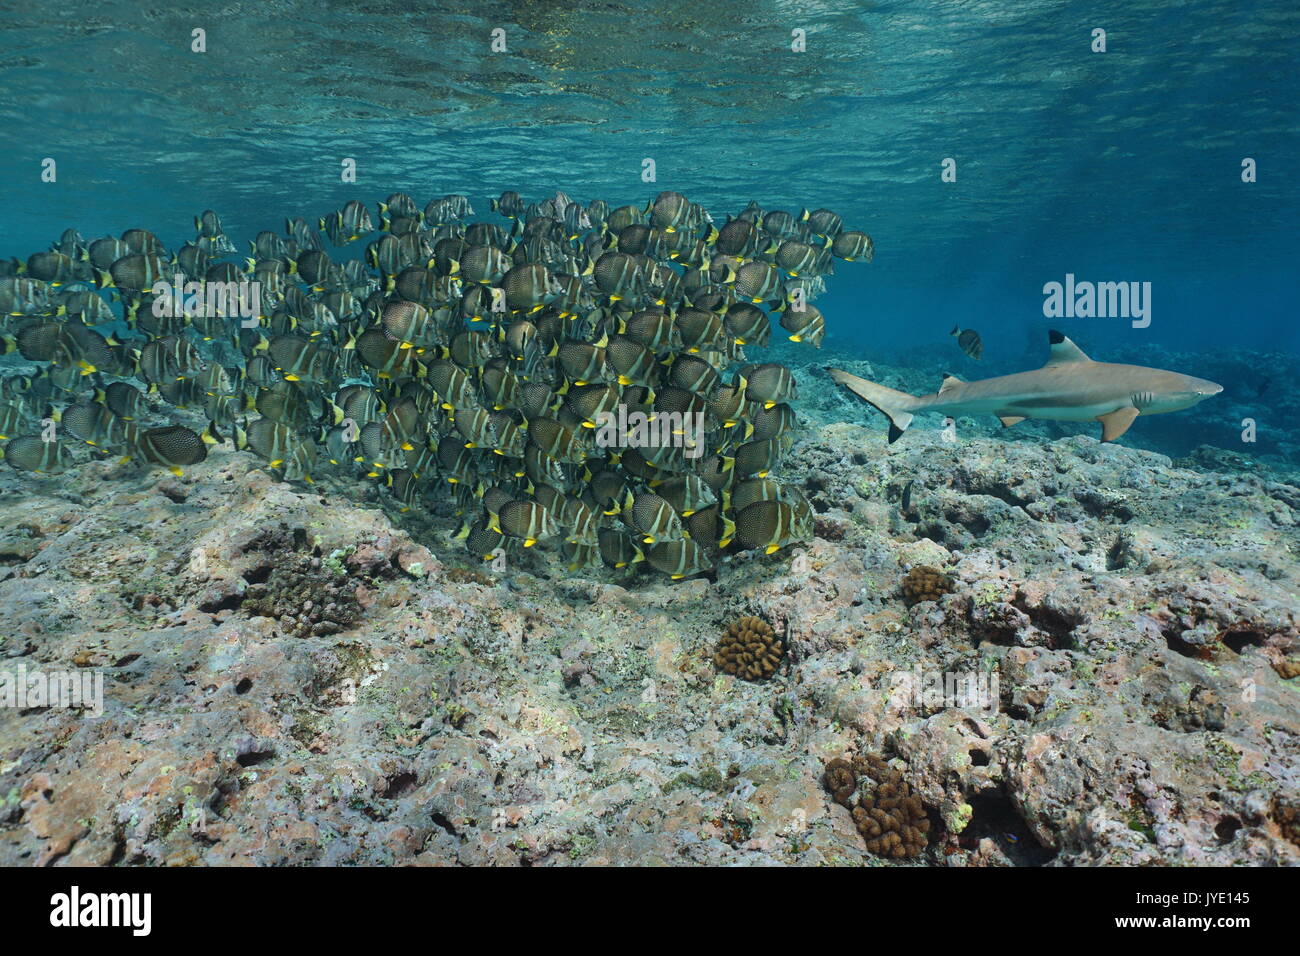 A school of tropical fish whitespotted surgeonfish follow a blacktip reef shark, underwater Pacific ocean, French Polynesia Stock Photo